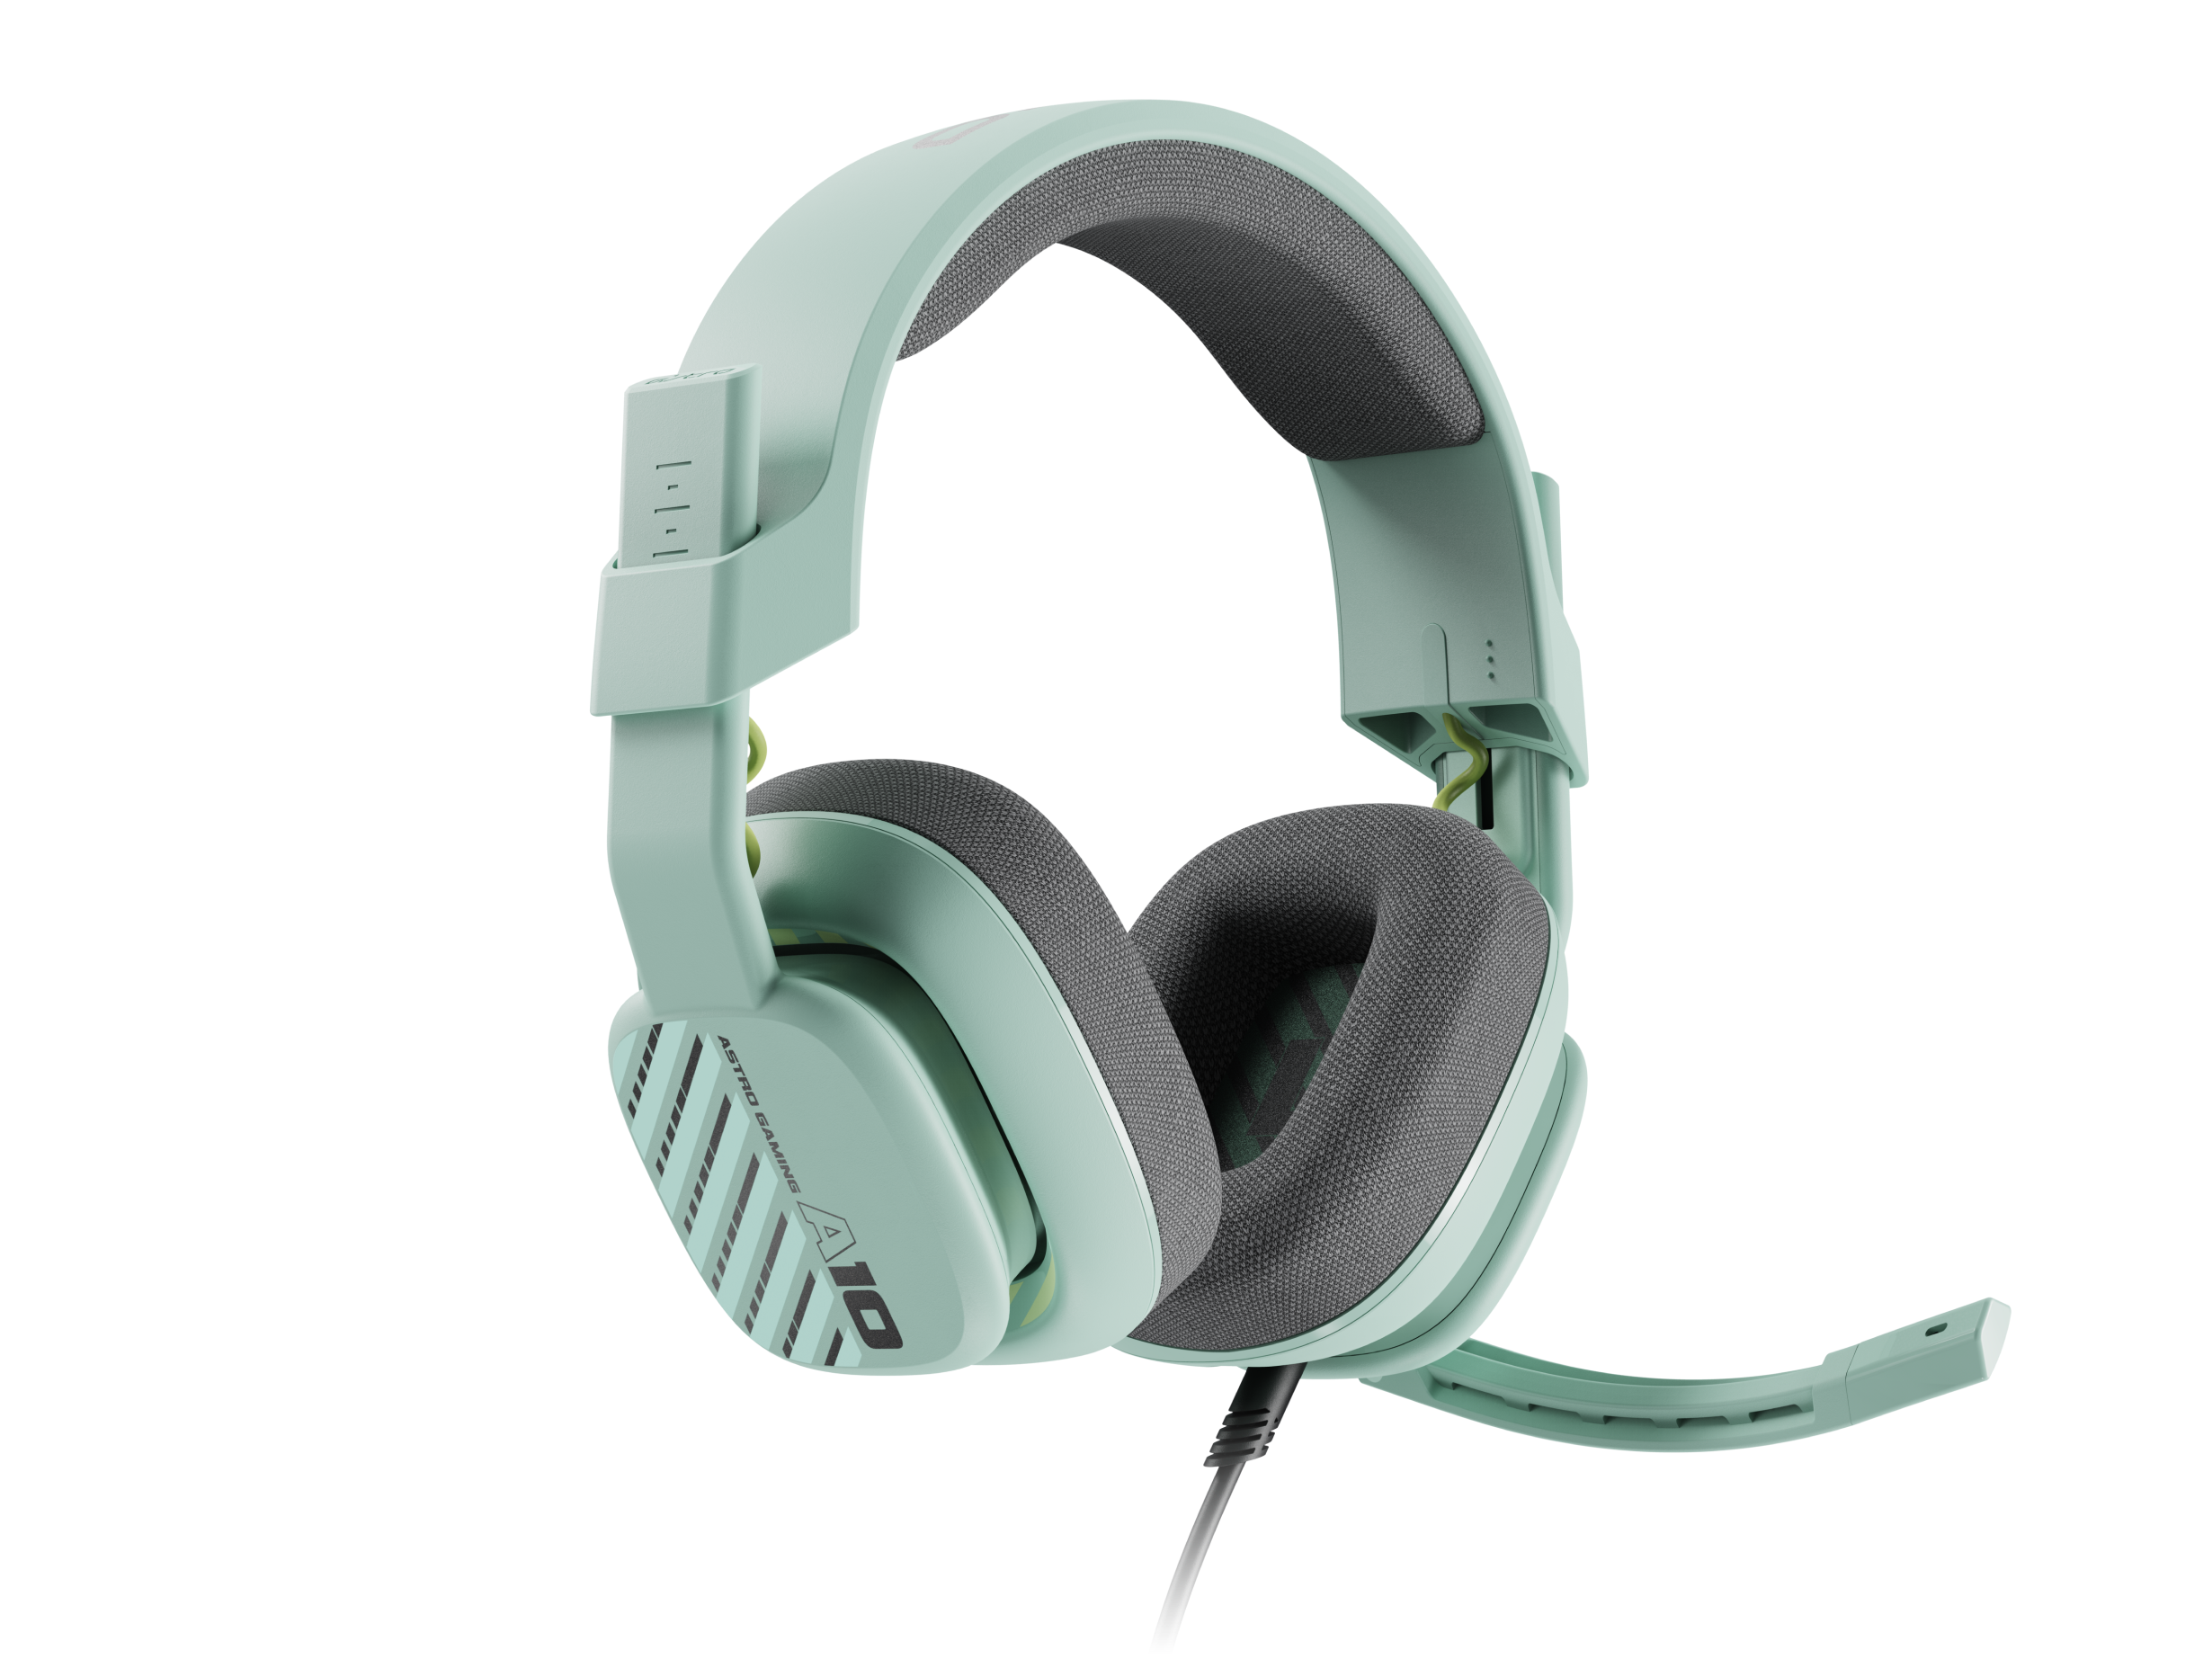 Astro A50 Wireless Dolby Gaming Headset for Xbox One / PS4 - Green